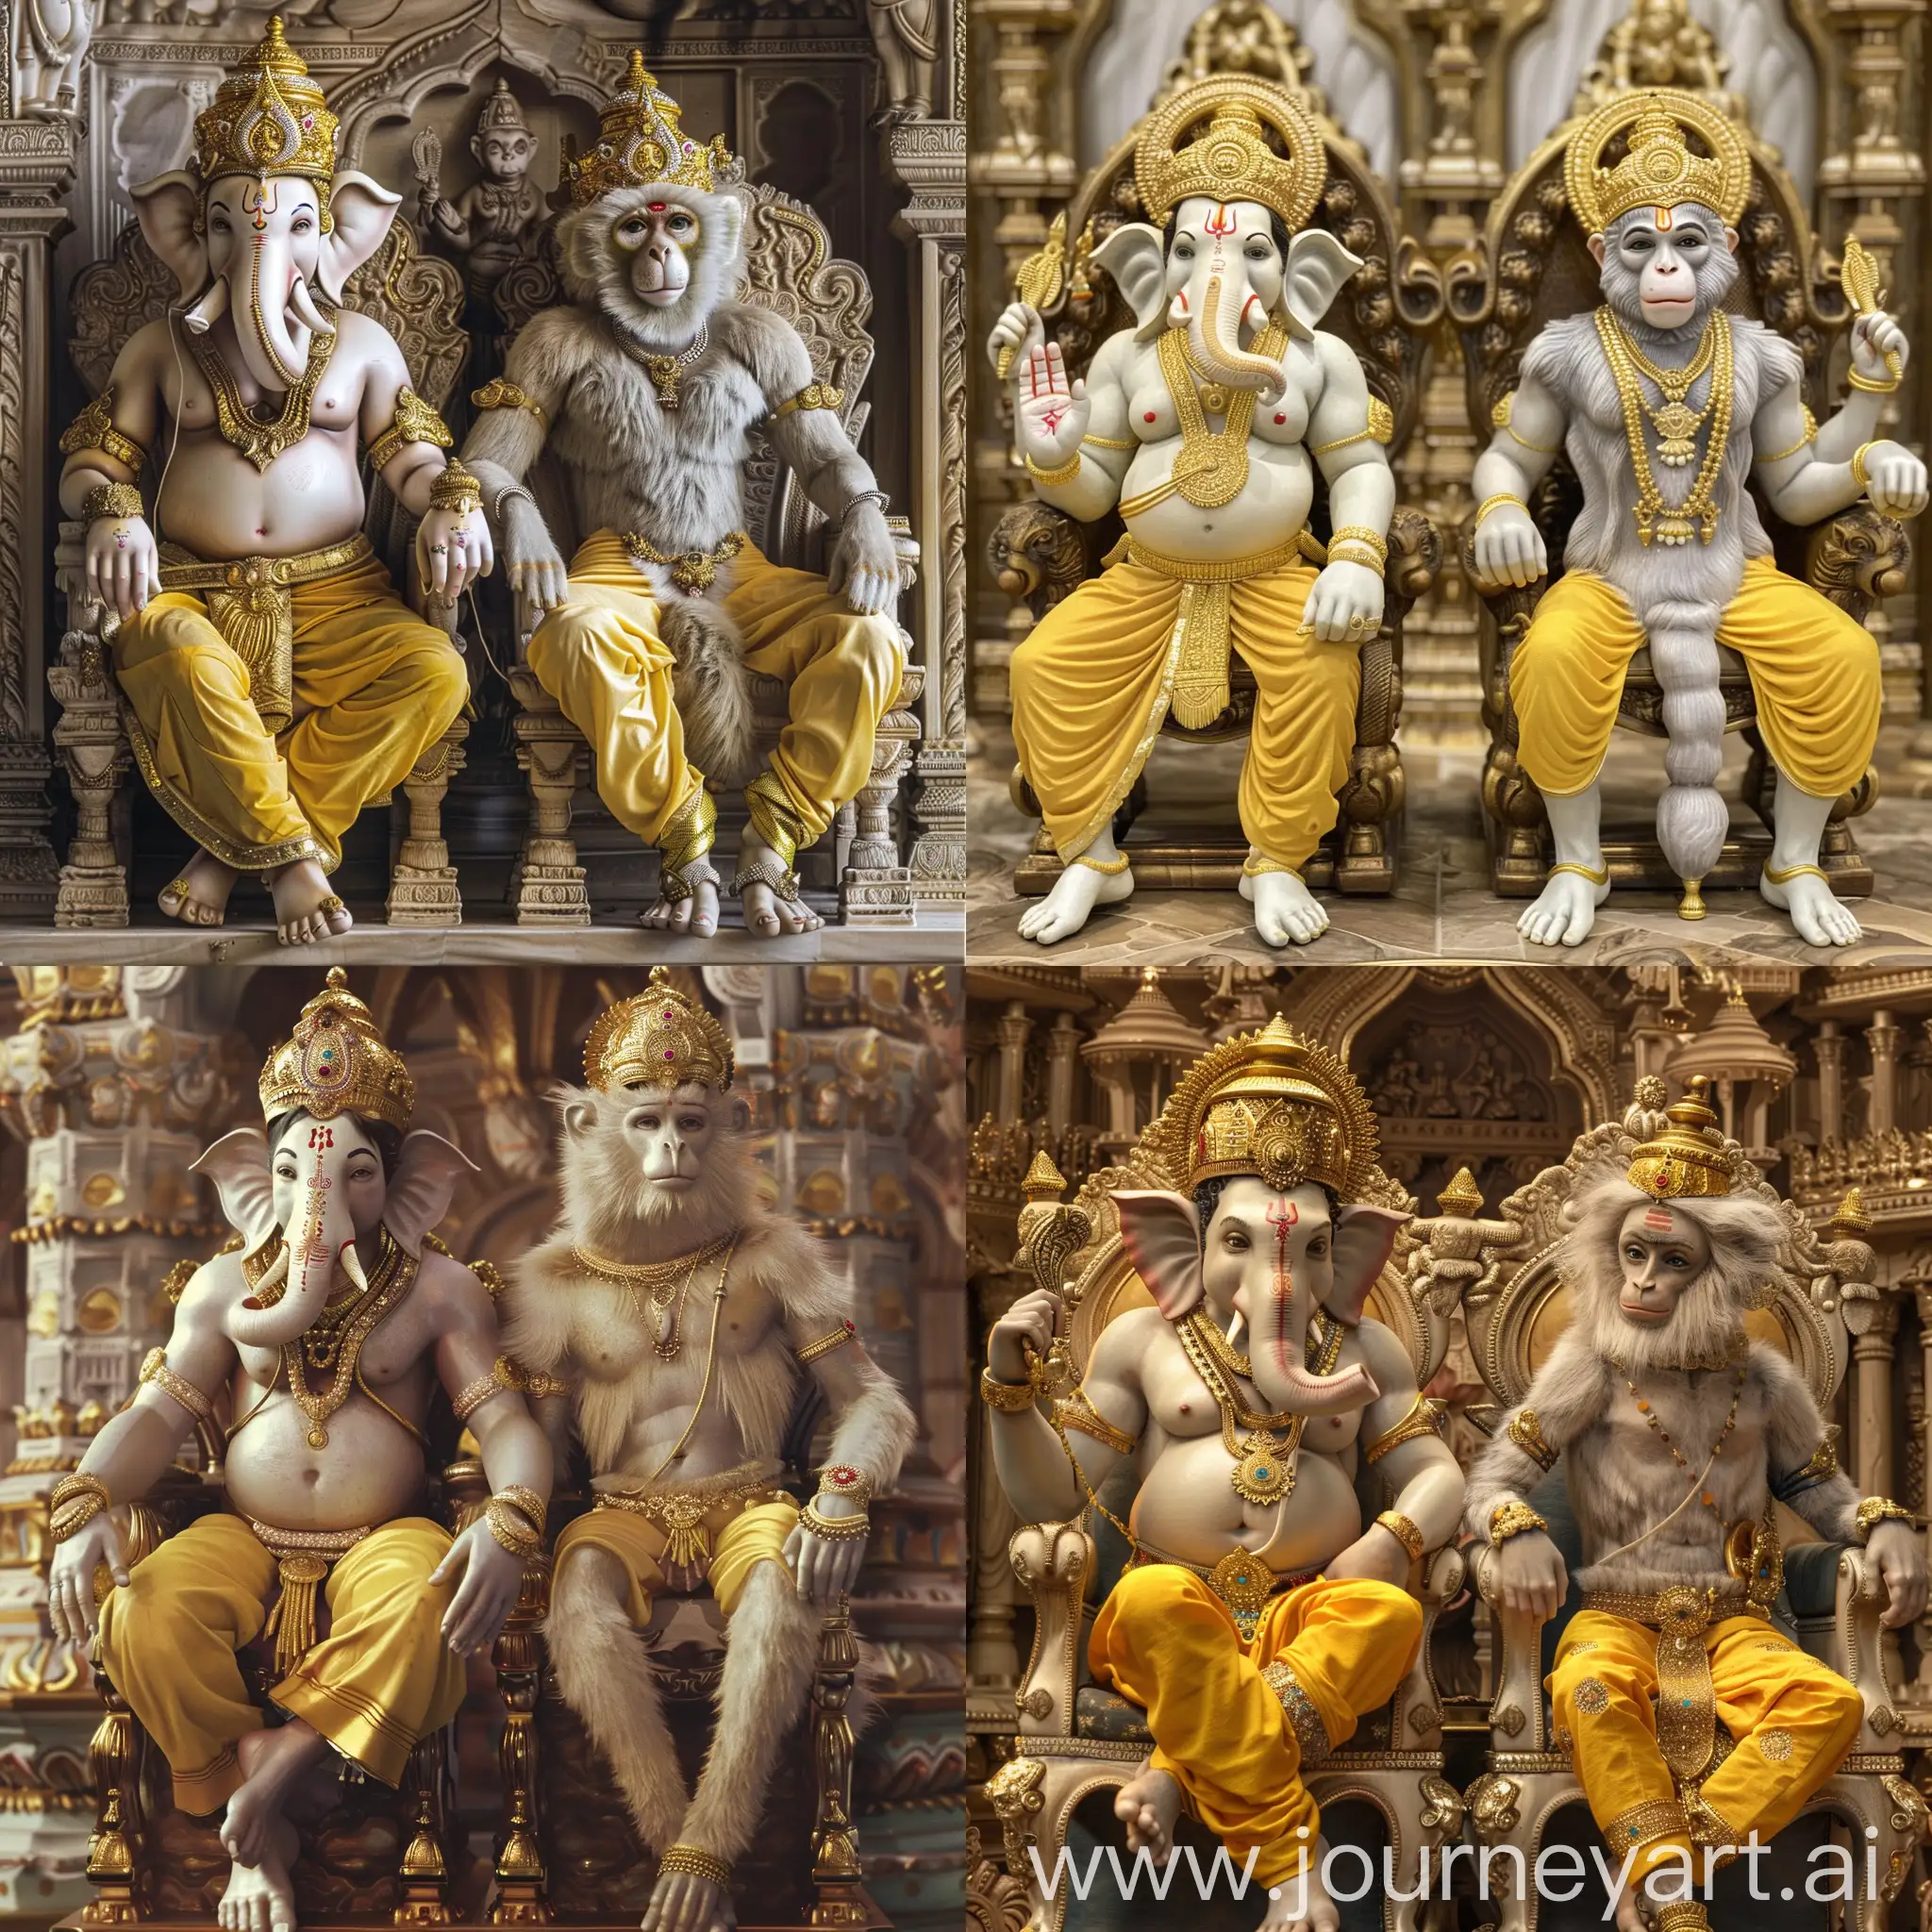 Two Hindu gods are sitting on their imperial thrones next to each other:

At left, there is the Hindu elephant god Ganesha in pale skin, it has a golden crown and yellow pants.

At right, there is the Hindu furry monkey god Hanuman in pale skin, it has a golden crown and yellow pants.

They are both inside a splendid Hindu temple.